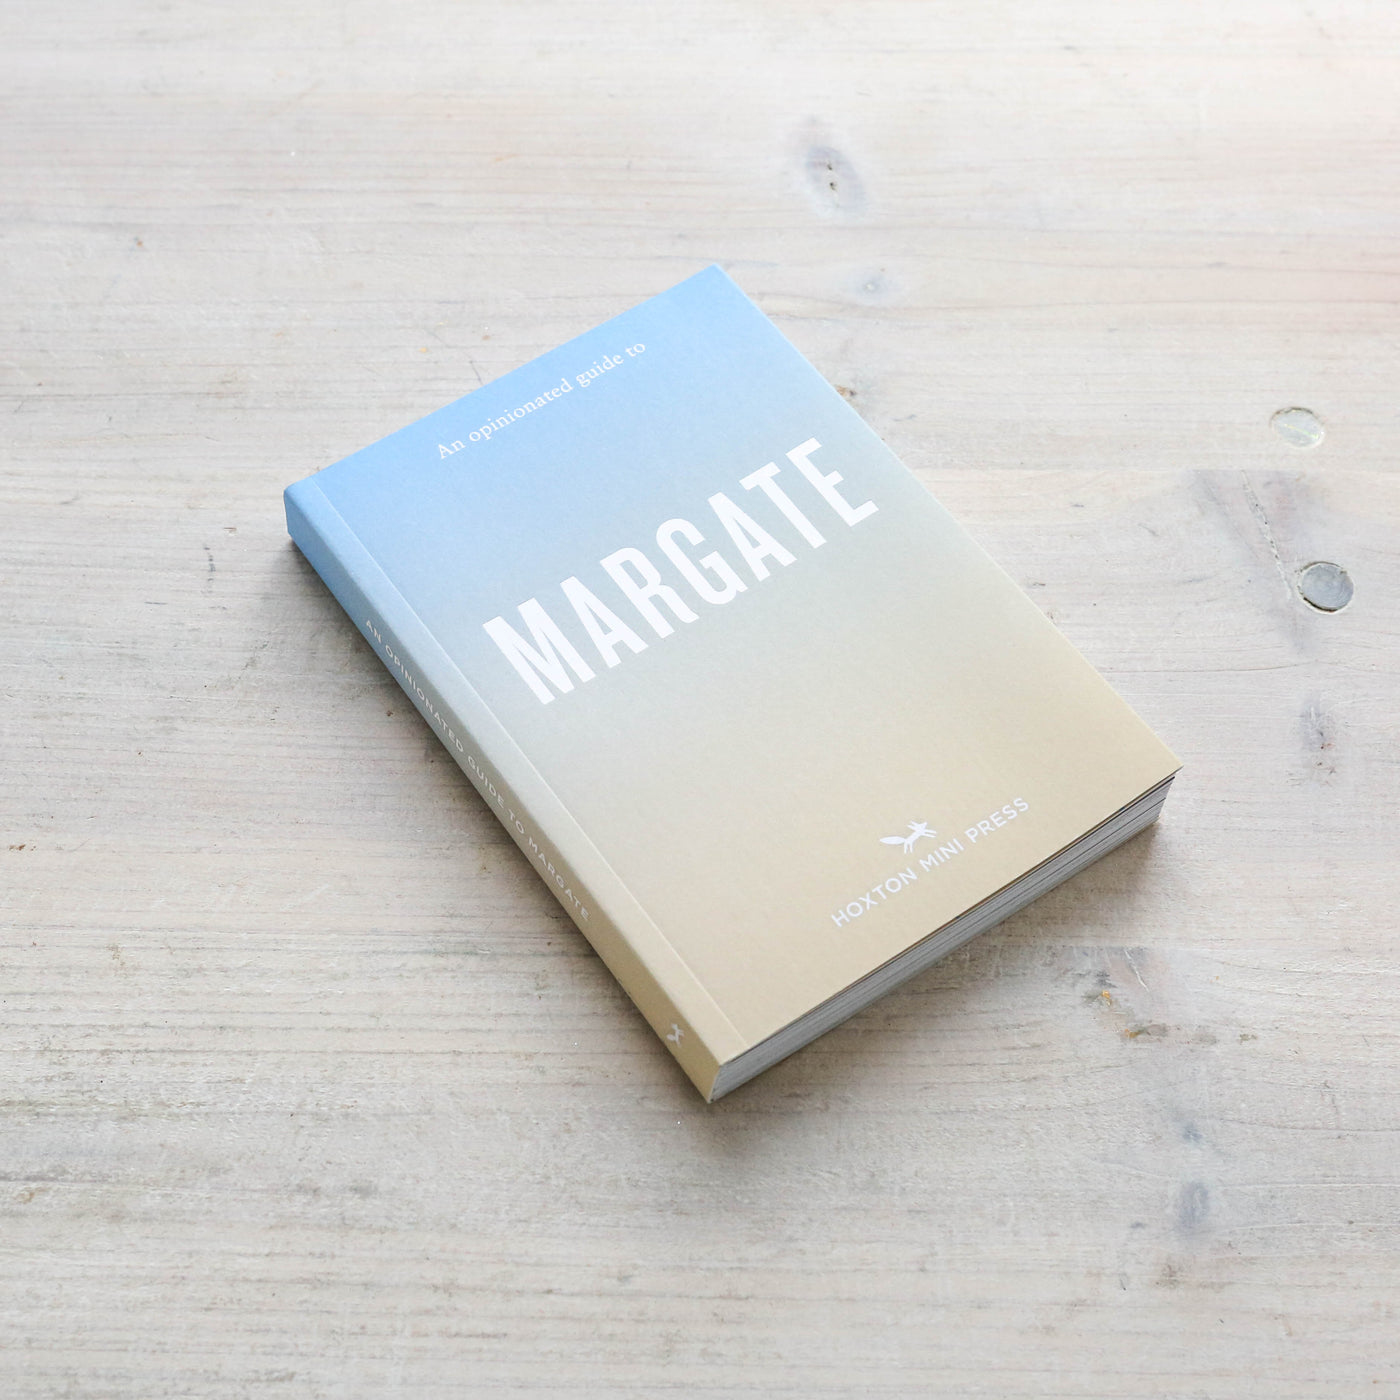 Margate - An Opinionated Guide